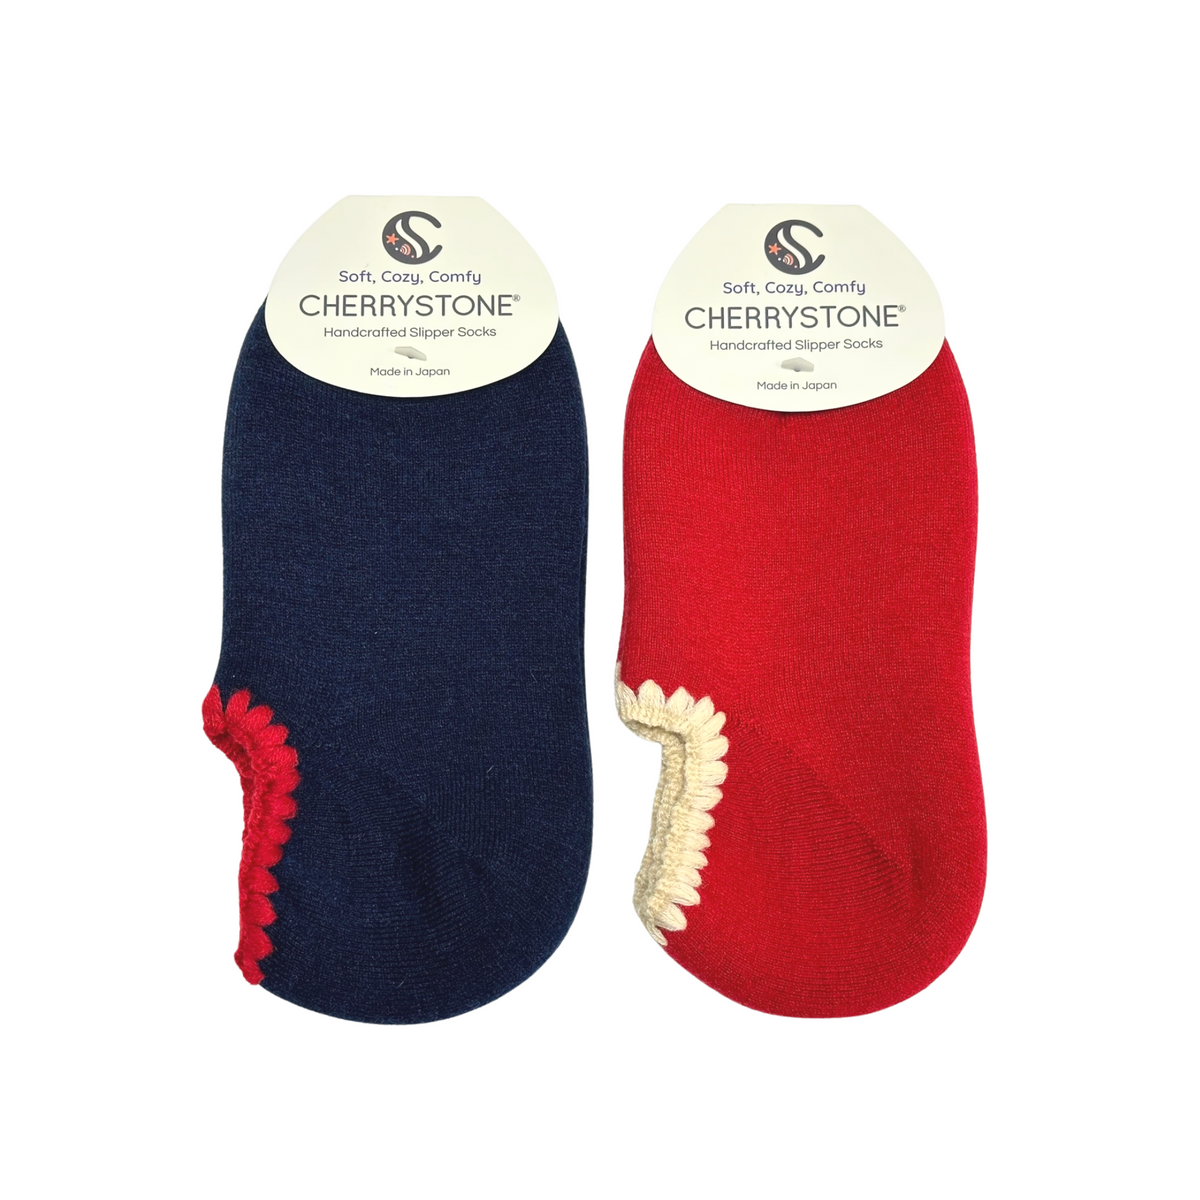 *Slipper Socks Gift Set* 2 Pairs in the Bento Box | Wool Blend No Grips | Size Medium | Red and Navy with Crocheted Trim | Reusable Gift Box - CHERRYSTONEstyle